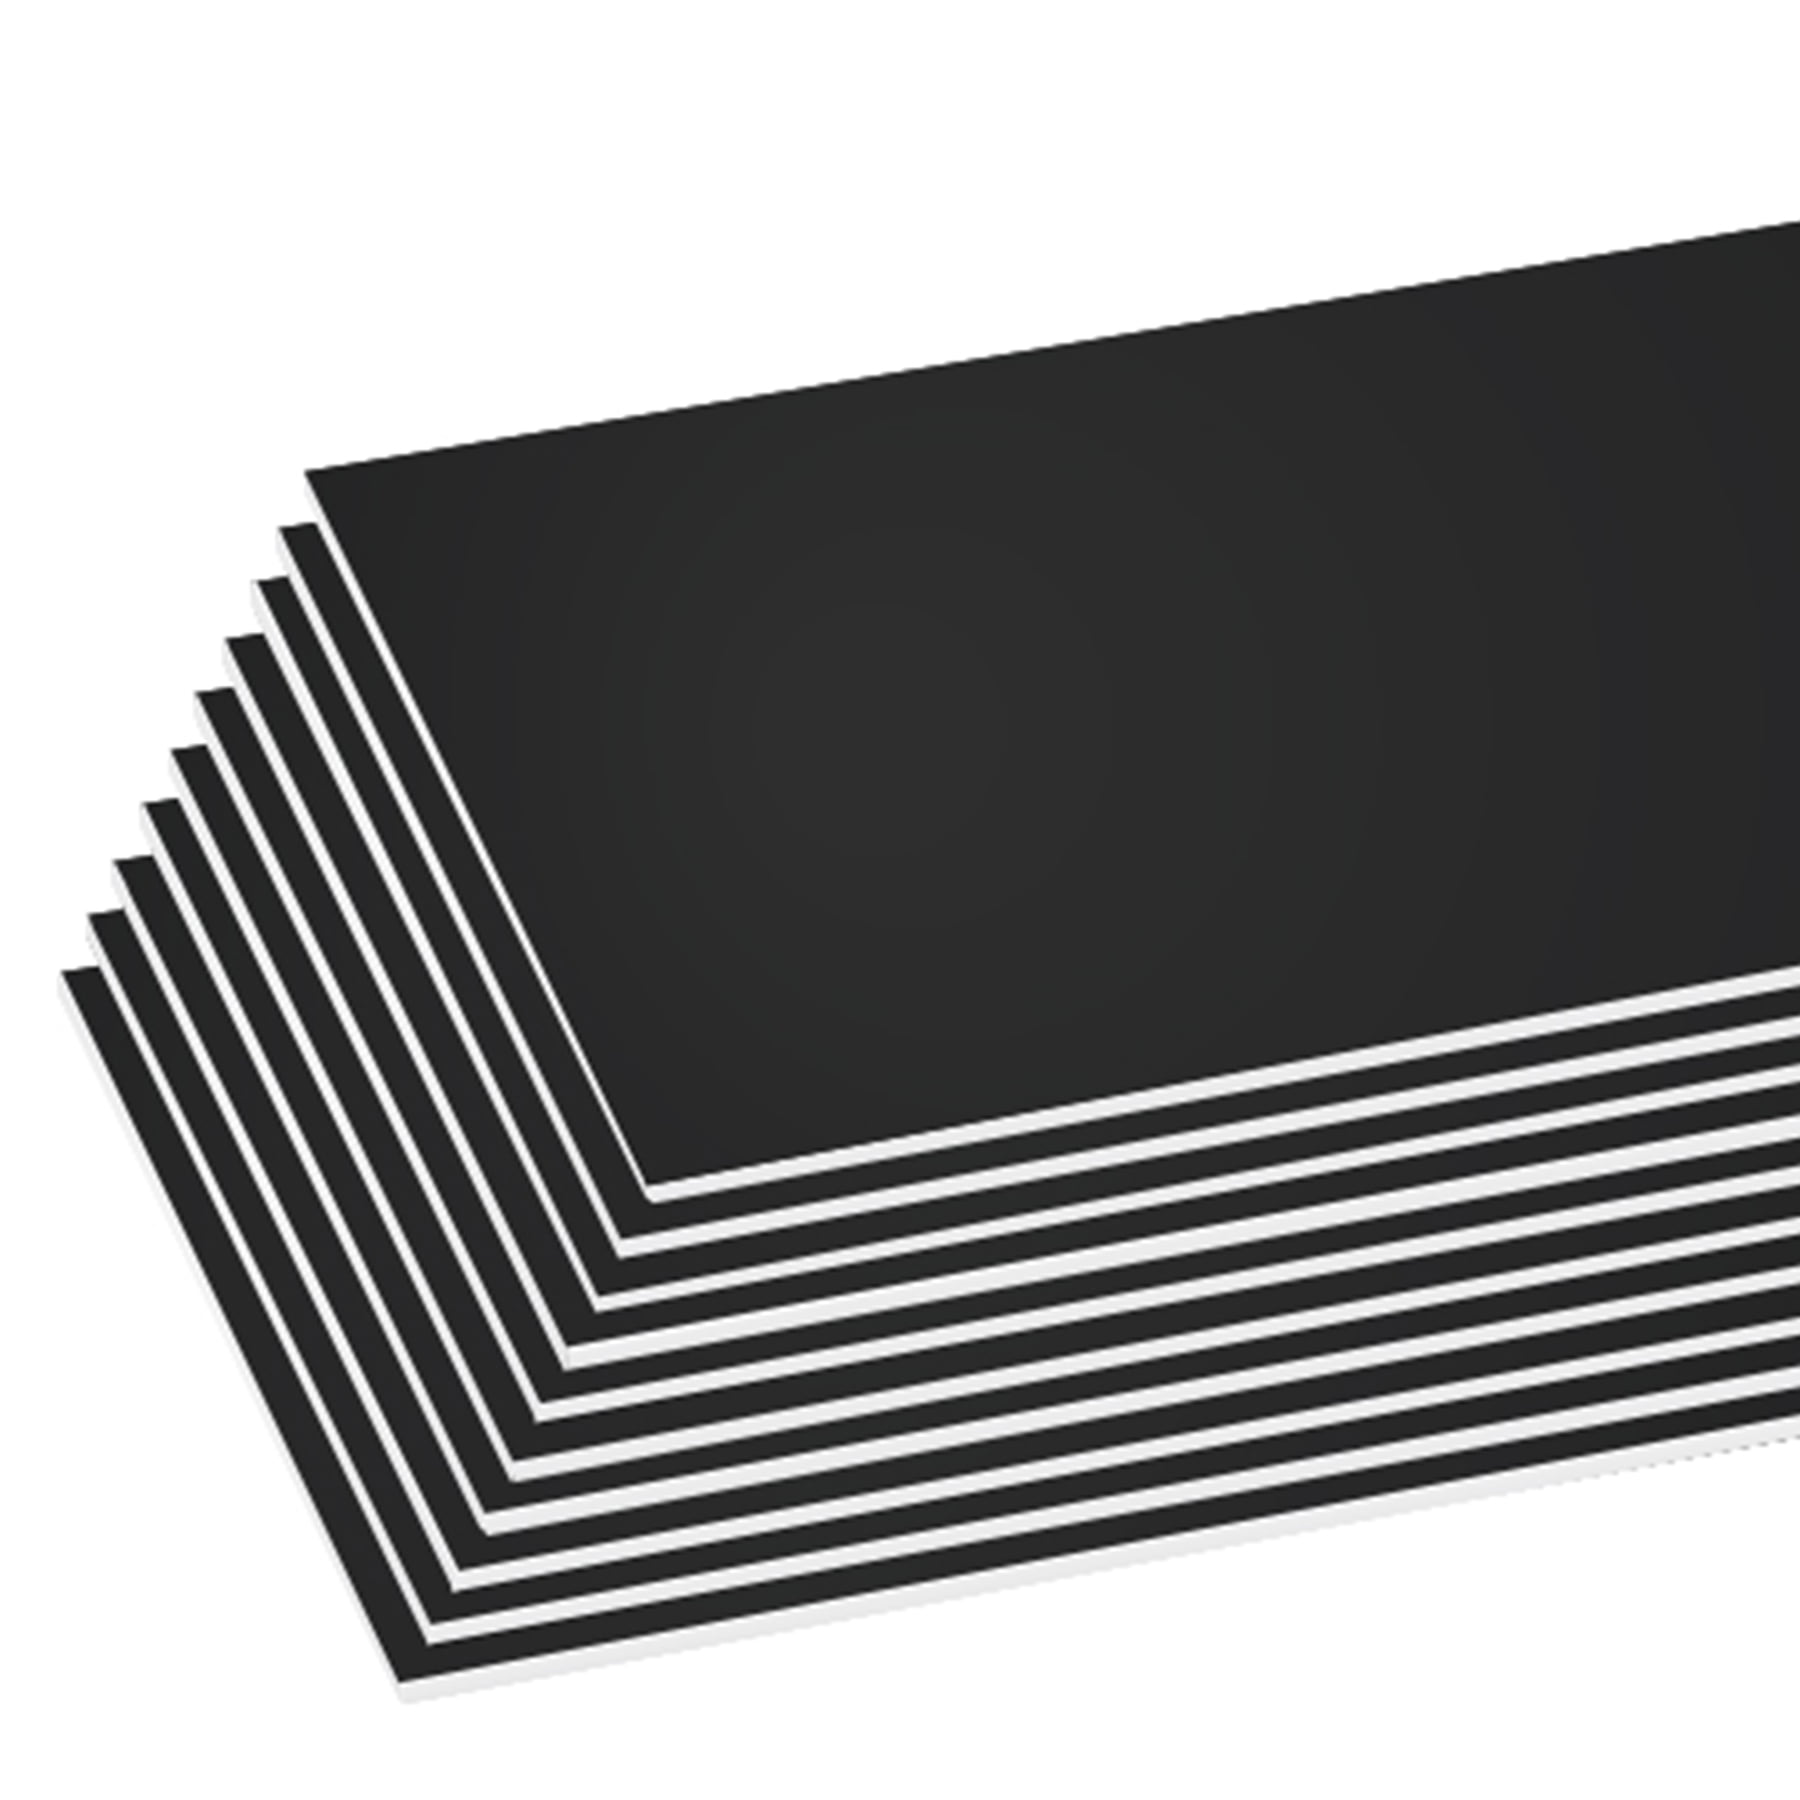 3/16 Black Foam Board - Any Size You Want! - Pack of 20